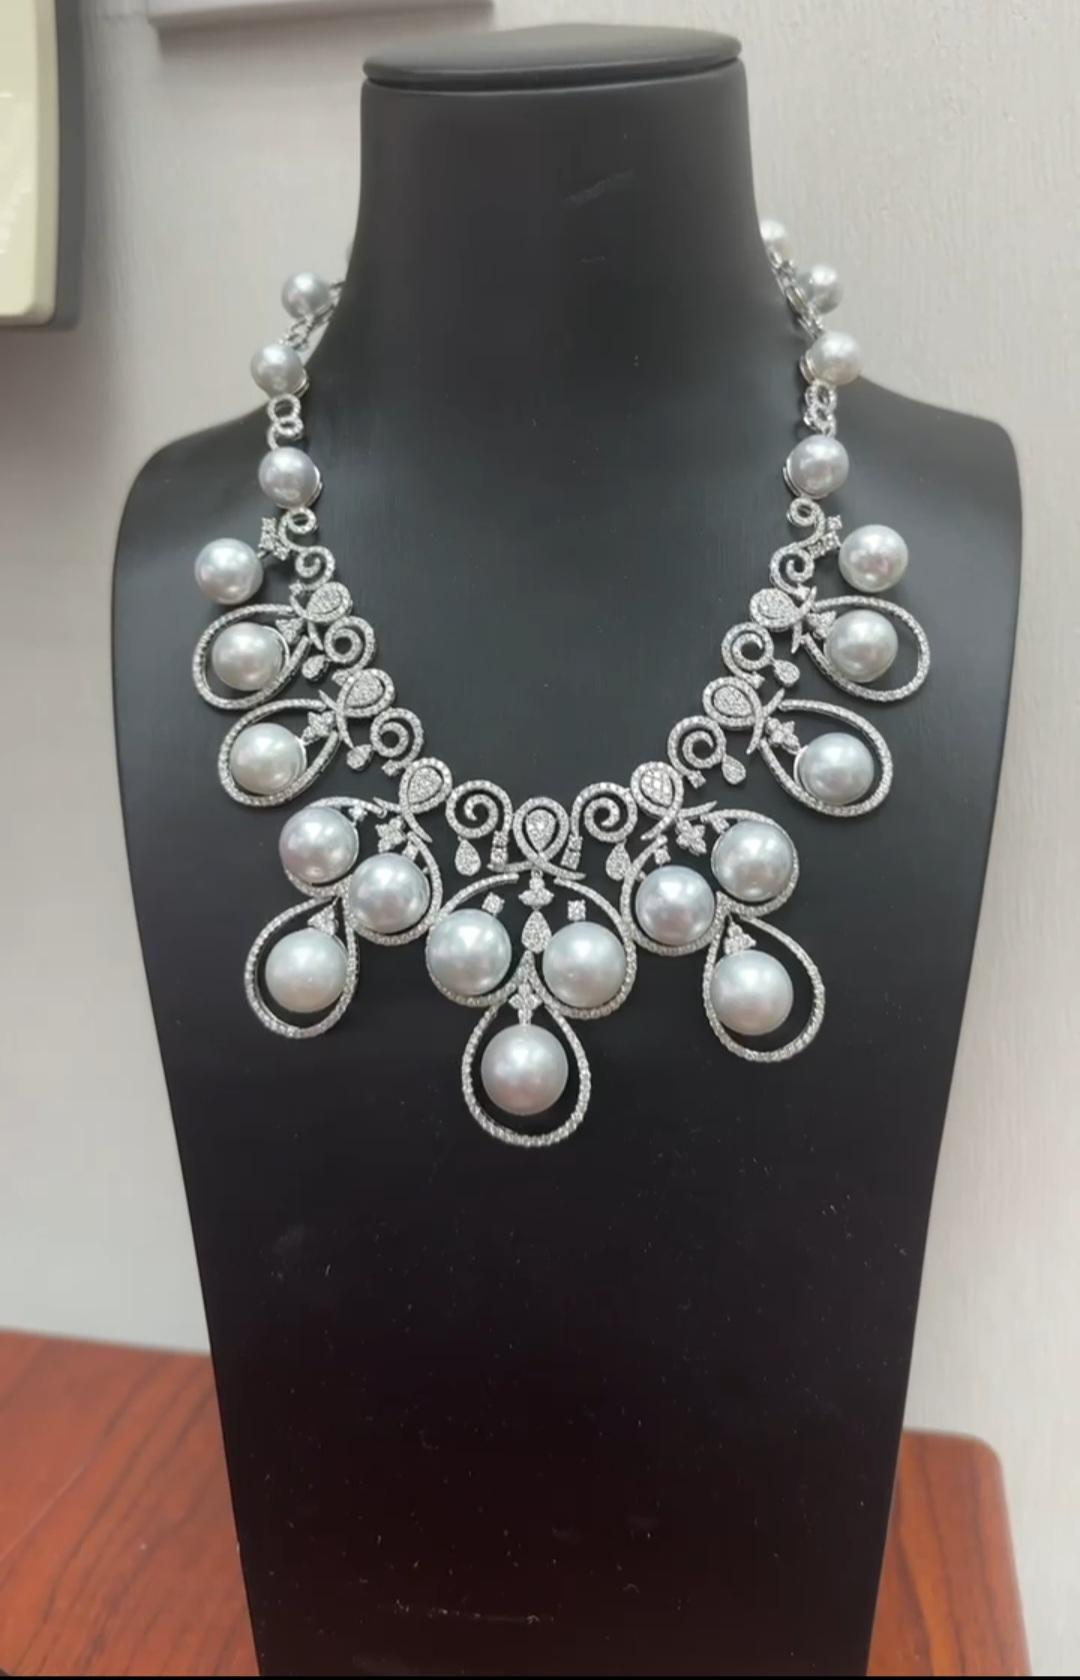 The Following Item we are offering is this Extremely Rare Beautiful 18KT Gold Fine Rare Large White South Sea Pearl Fancy Diamond Necklace. This Magnificent Necklace is comprised of Rare Fine Large AA-AAA 10-11MM South Sea Pearls with Gorgeous